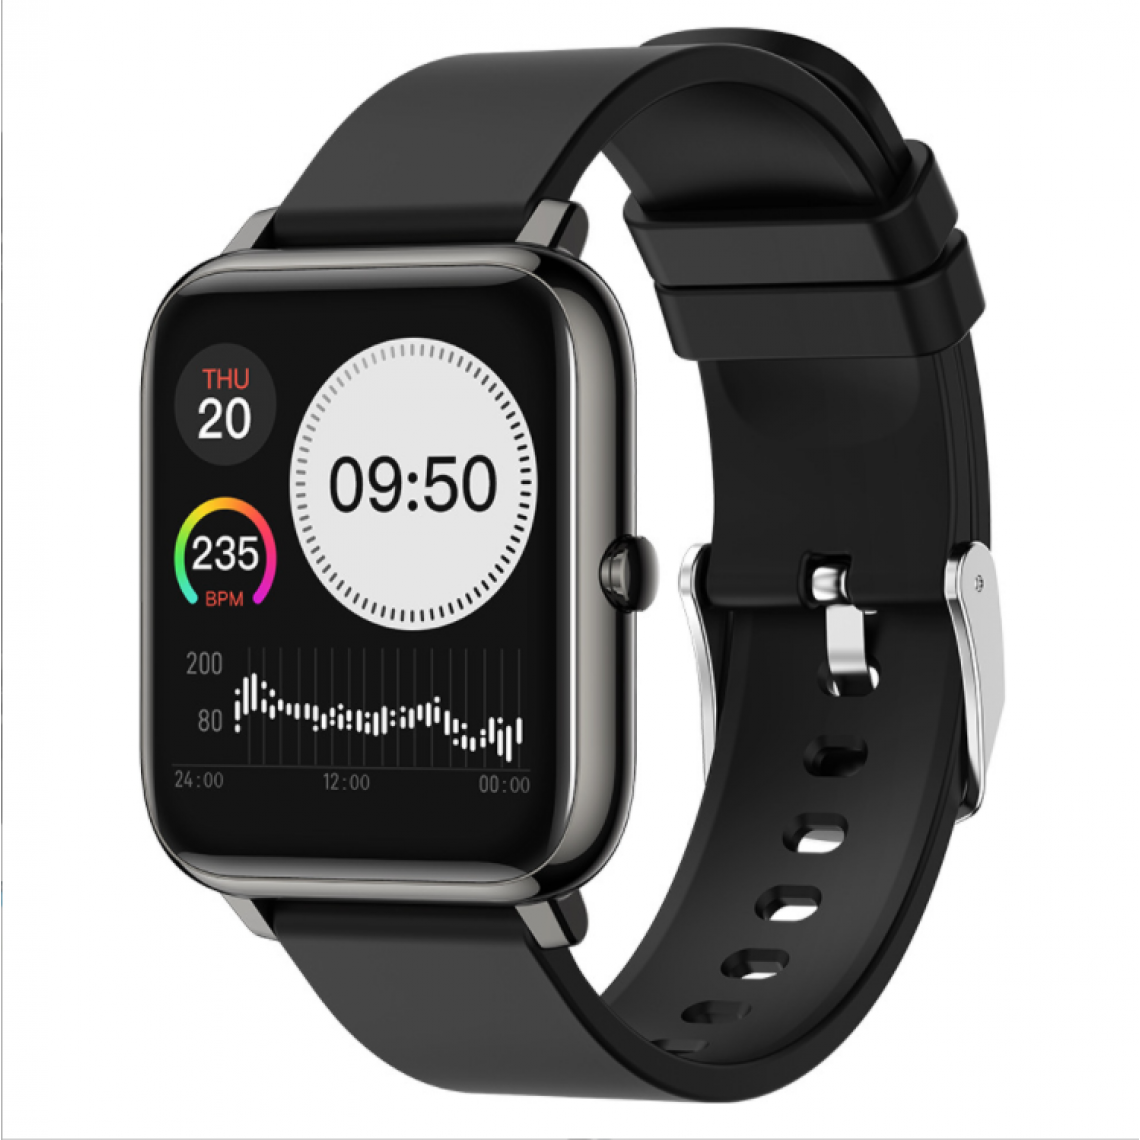 Chronotech Montres - Chronus Smart Watch with Heart Rate and Sleep Monitor, IP67 Water Resistant for Men and Women (Black) - Montre connectée